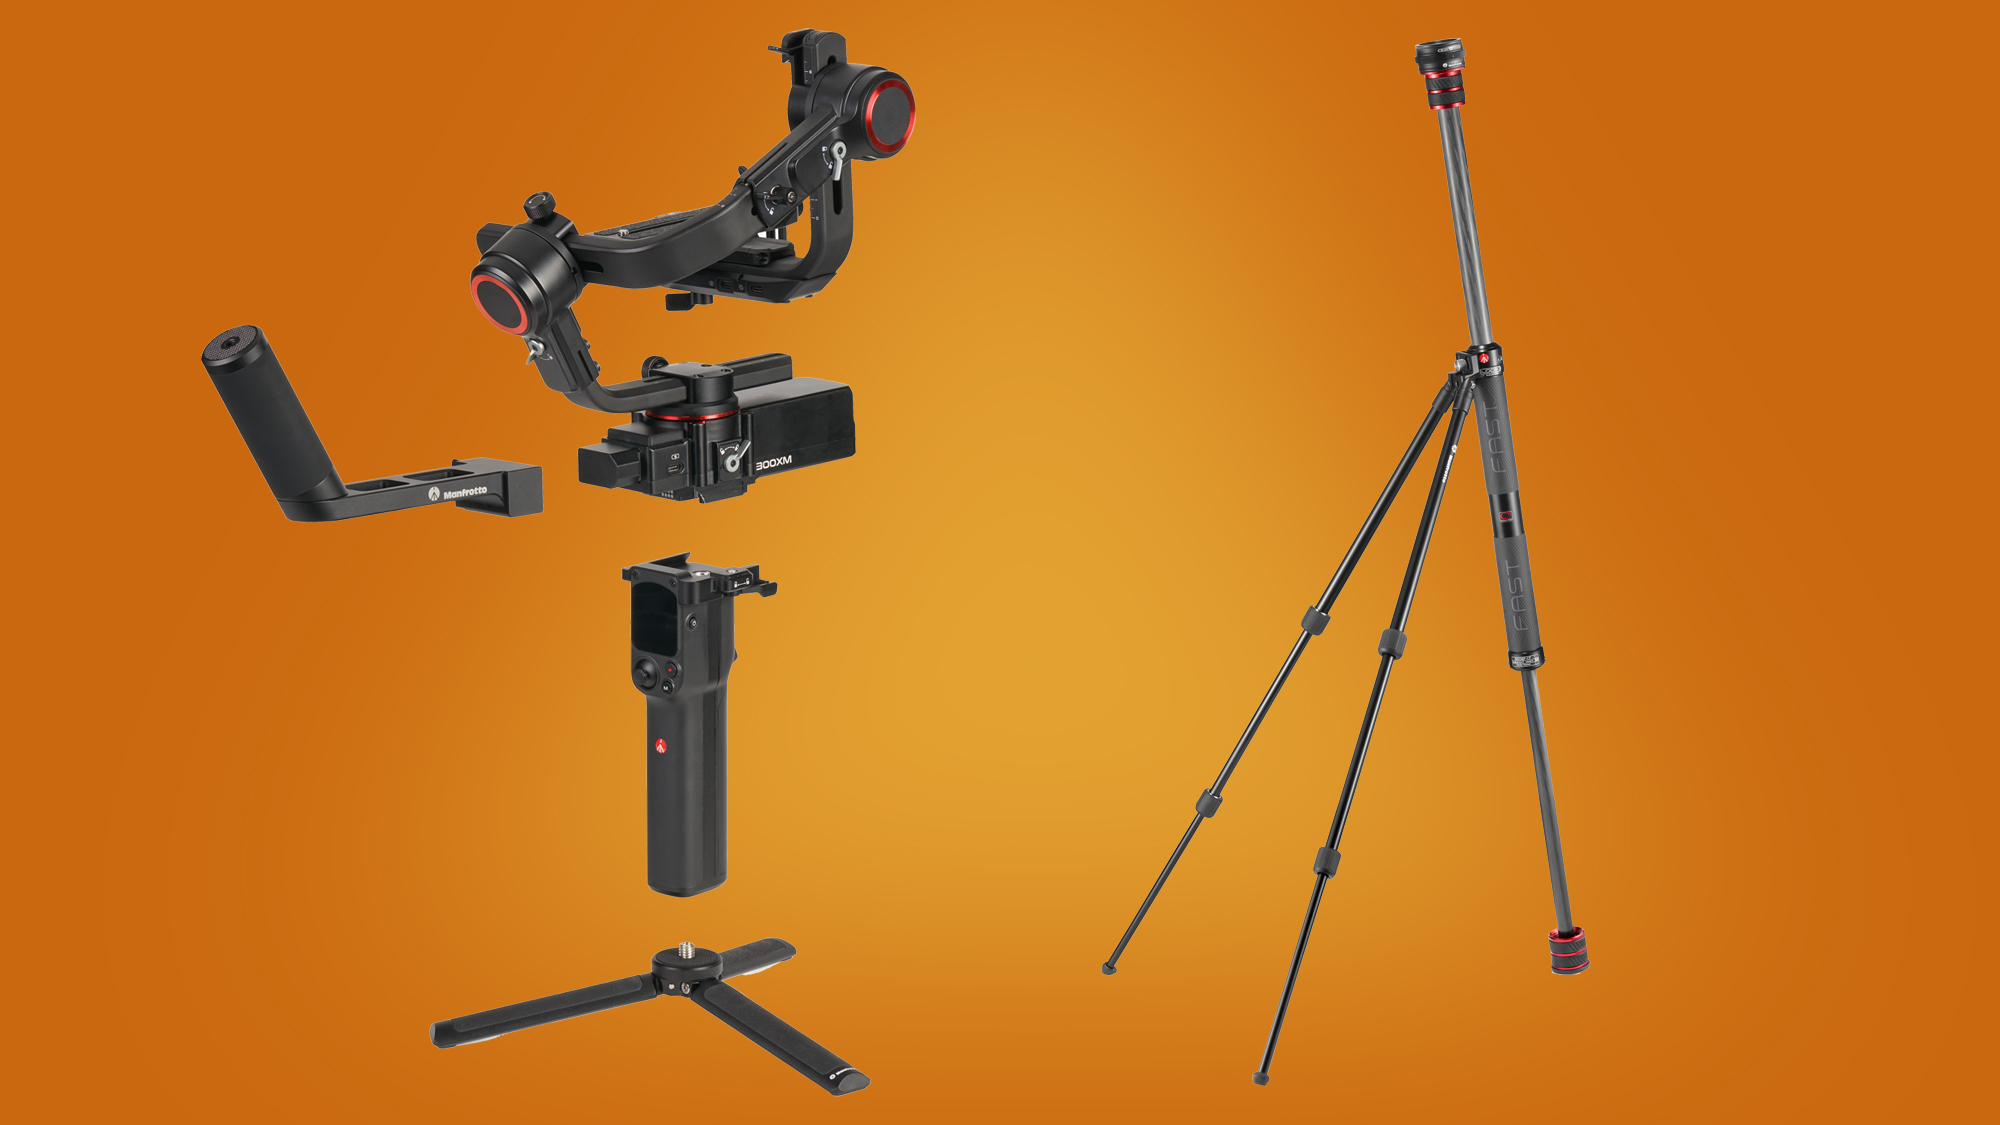 The Manfrotto Move Gimbal and GimPod with GimBoom